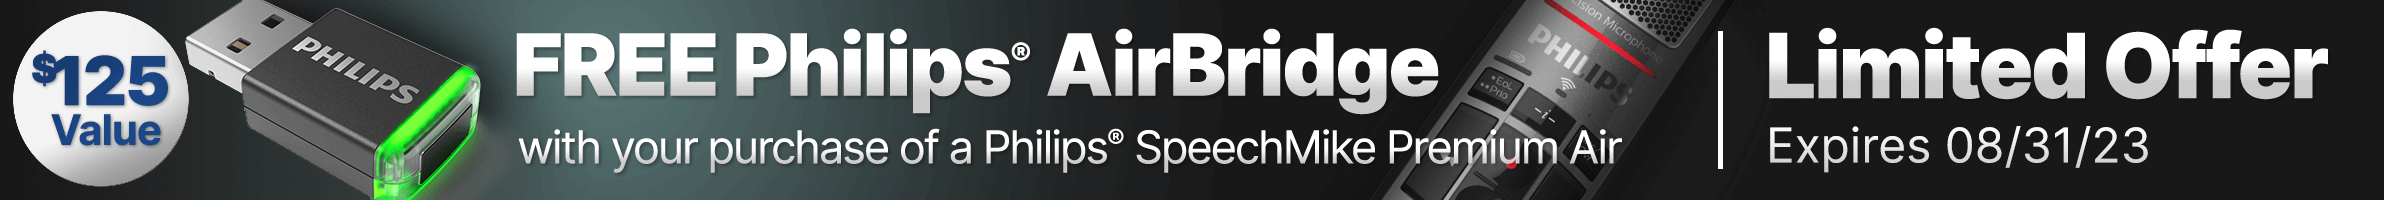 Limited offer, free AirBridge with SpeechMike Air purchase by 8/31/23